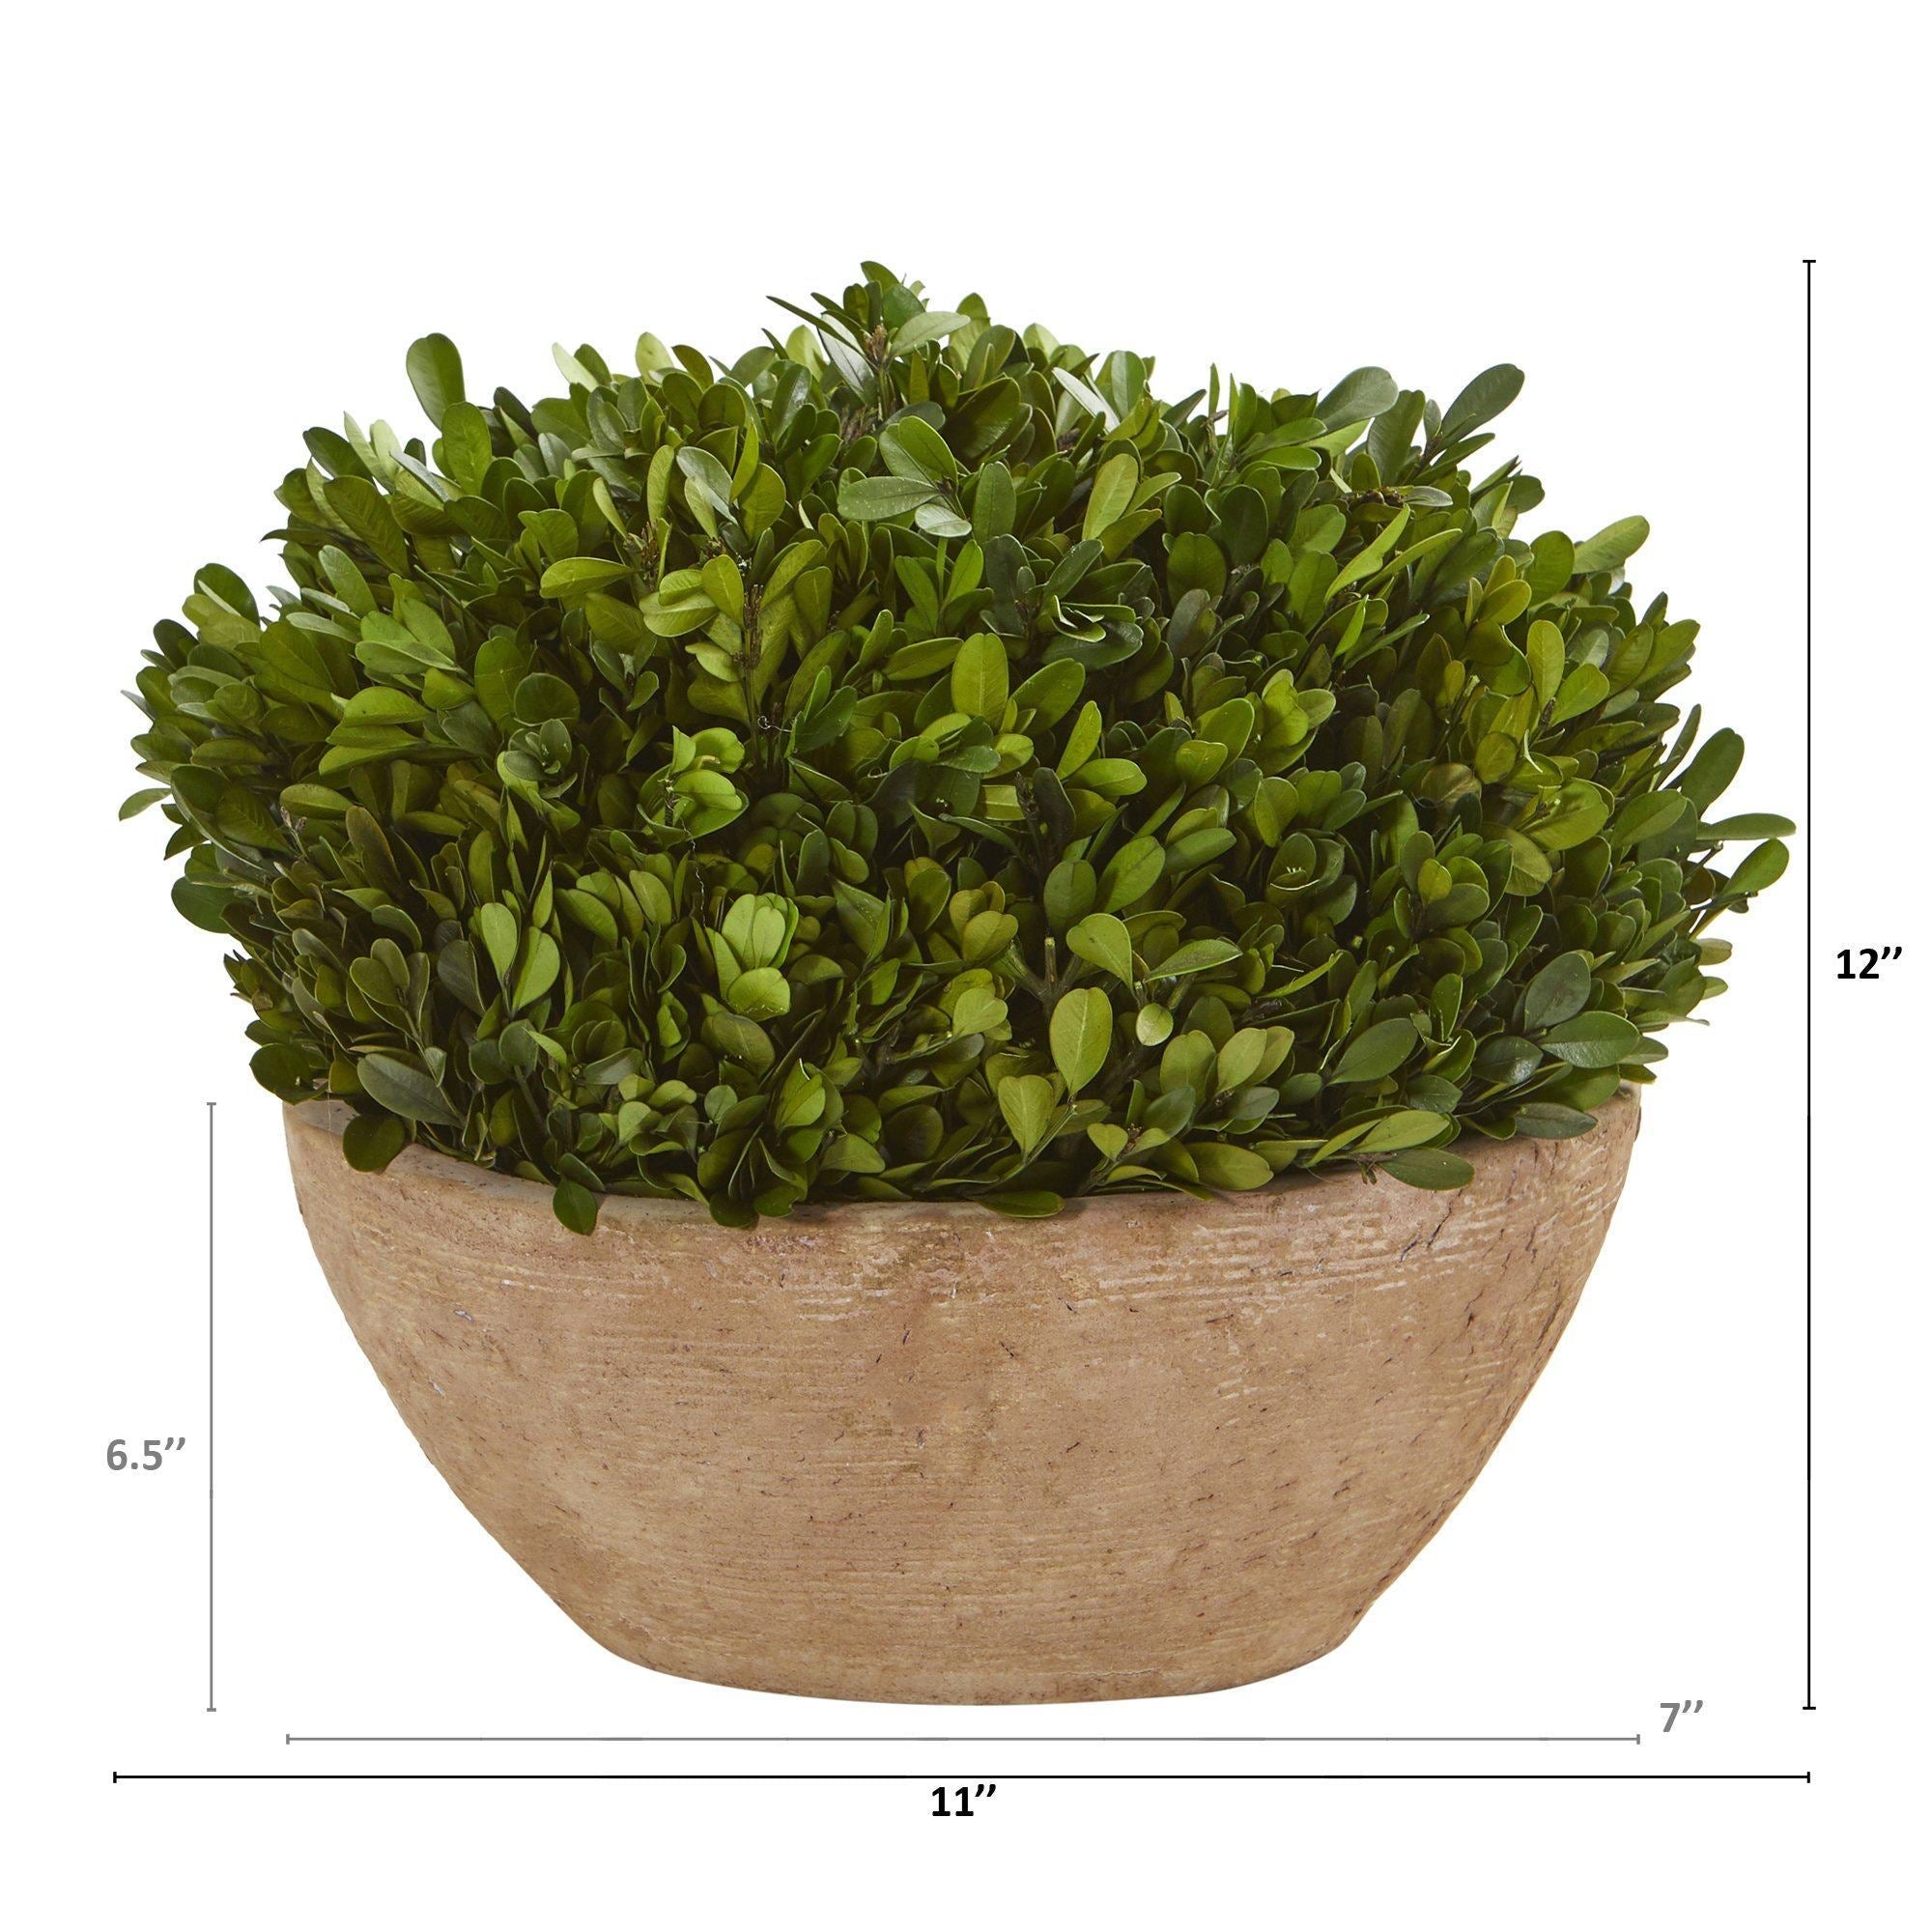 12” Boxwood Preserved Plant in Oval Planter by Nearly Natural